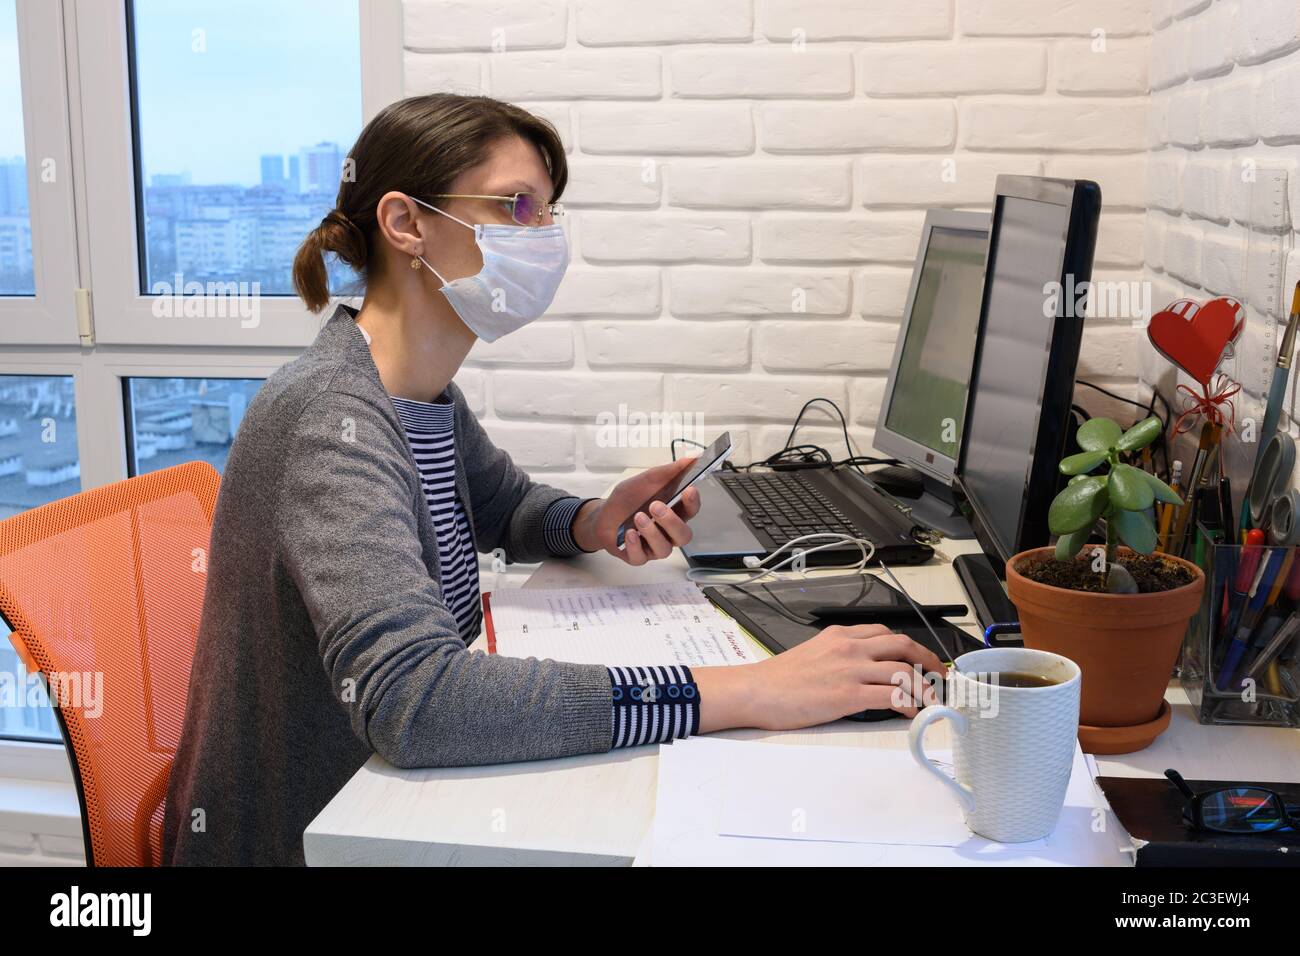 A sick girl in a medical mask in self-isolation works remotely Stock Photo